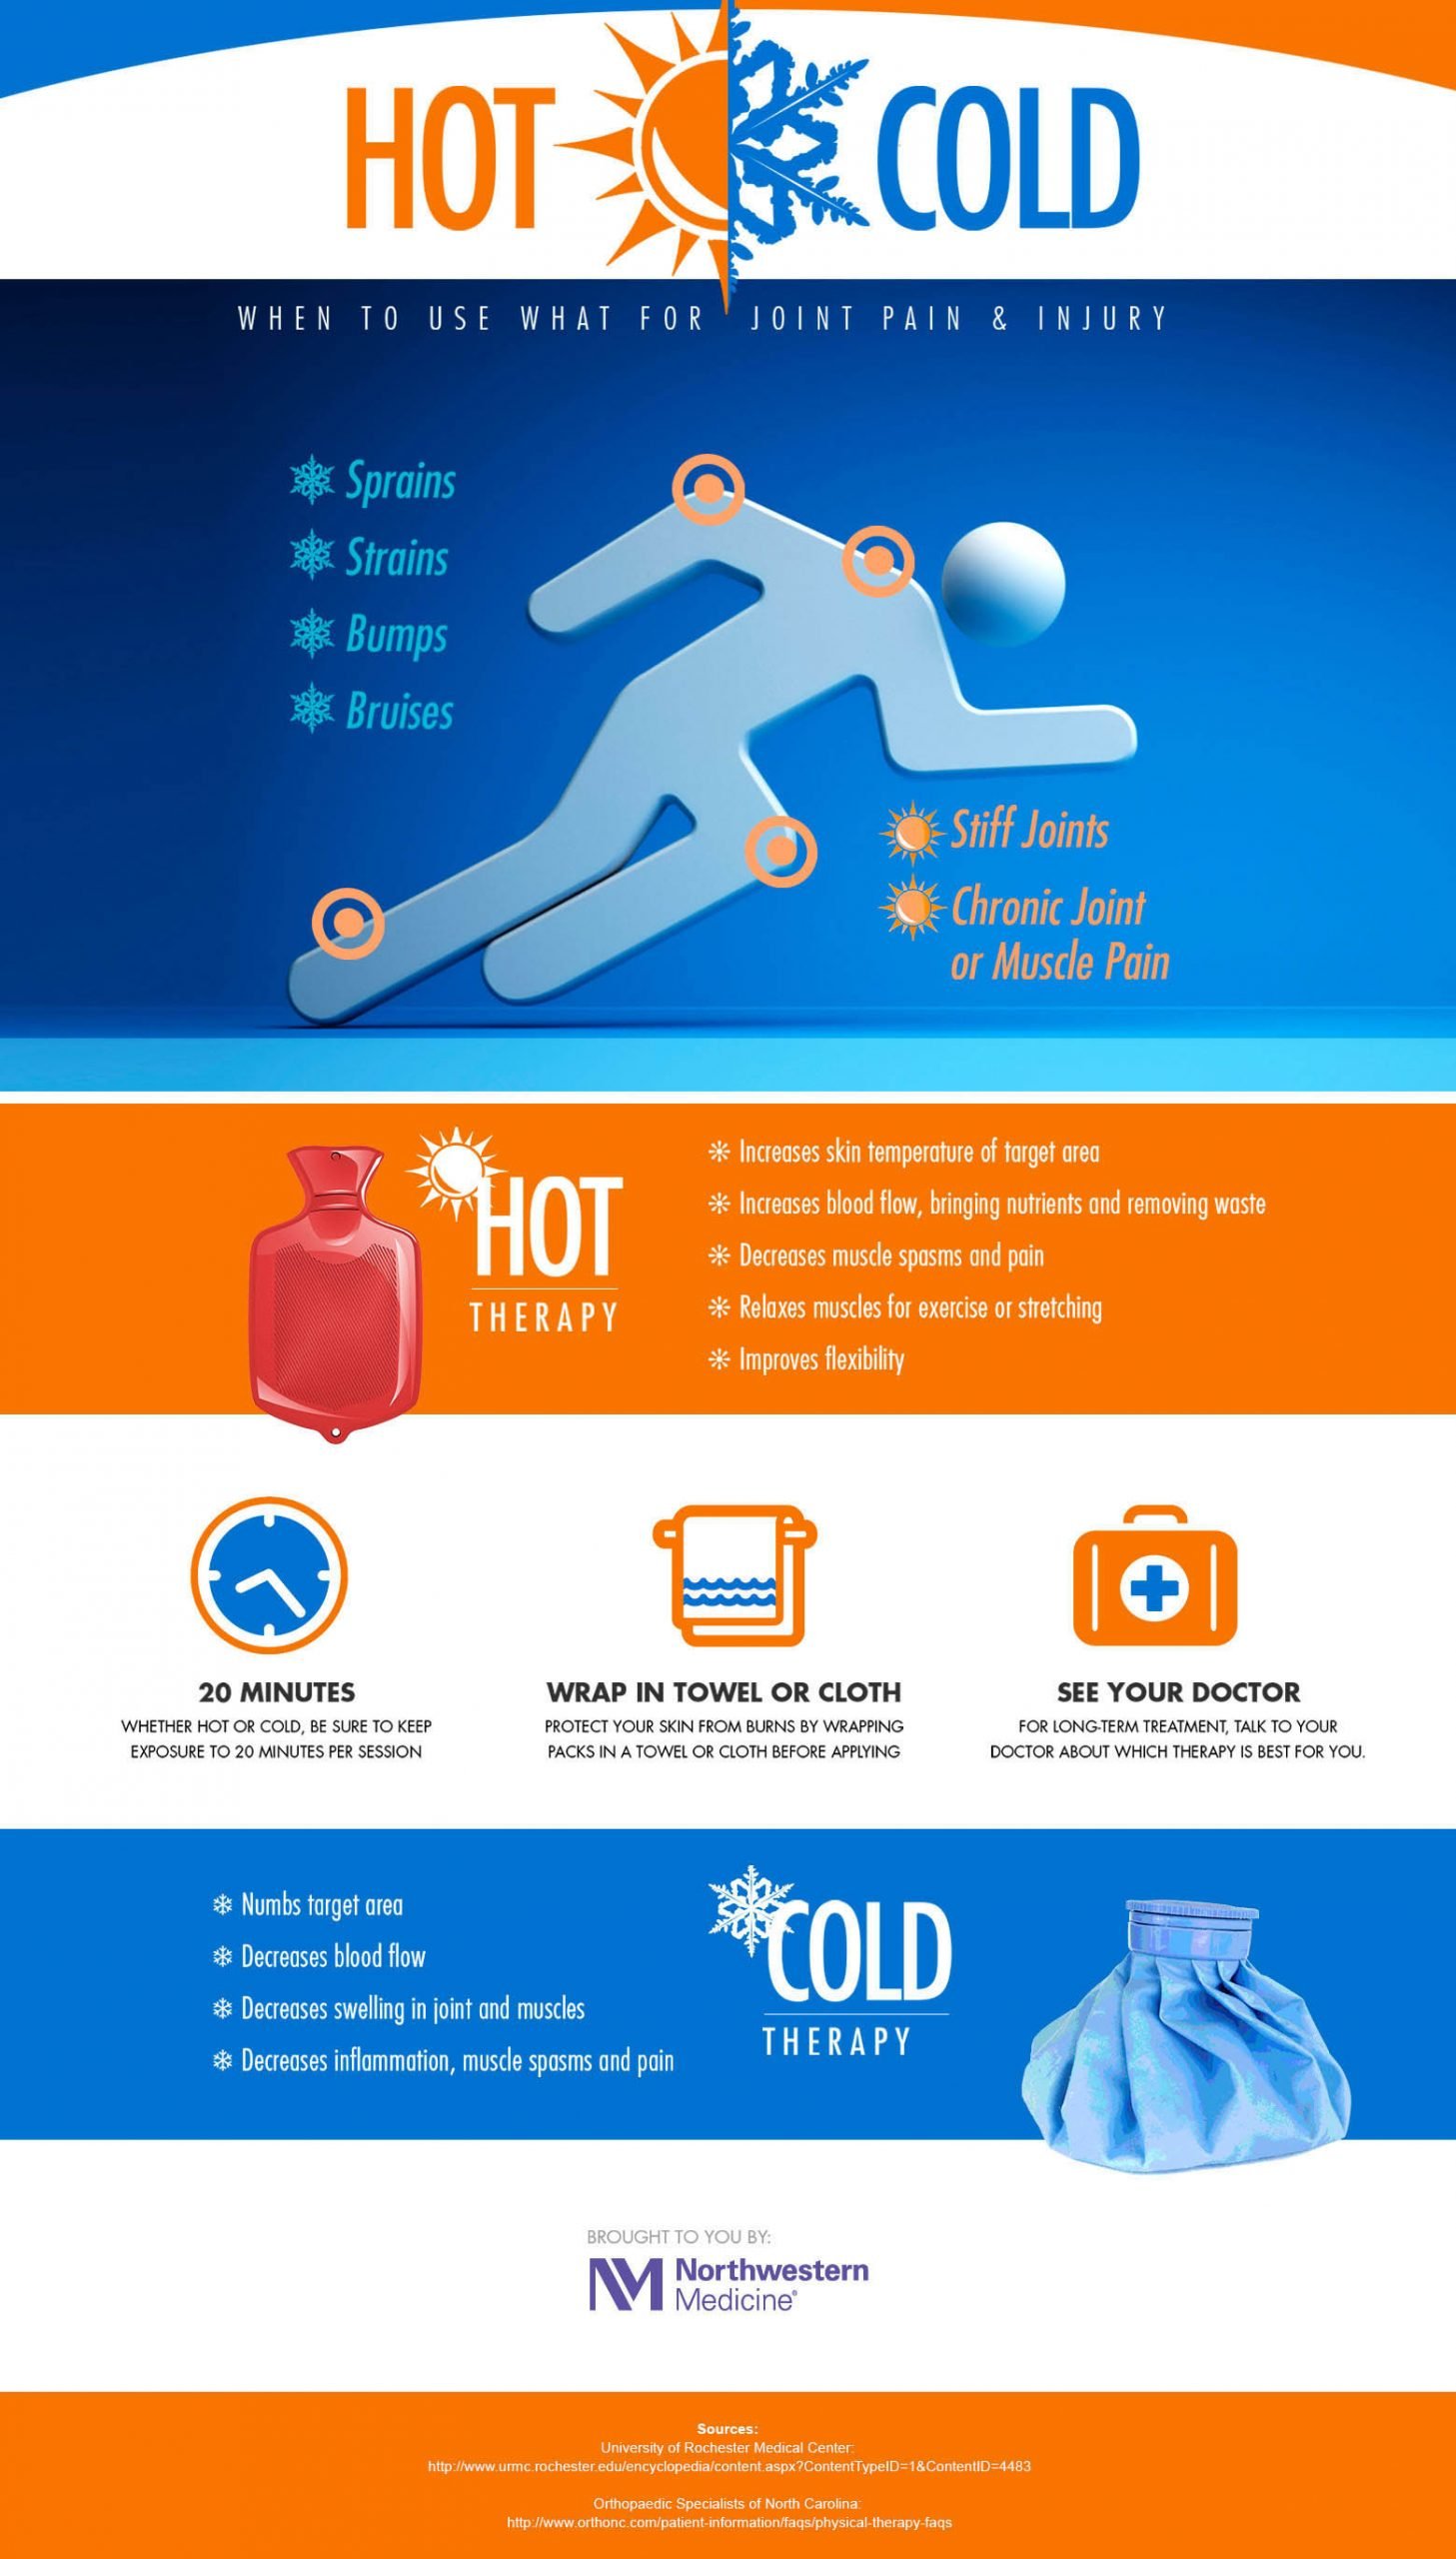 Hot vs. Cold Therapy for Joint Pain